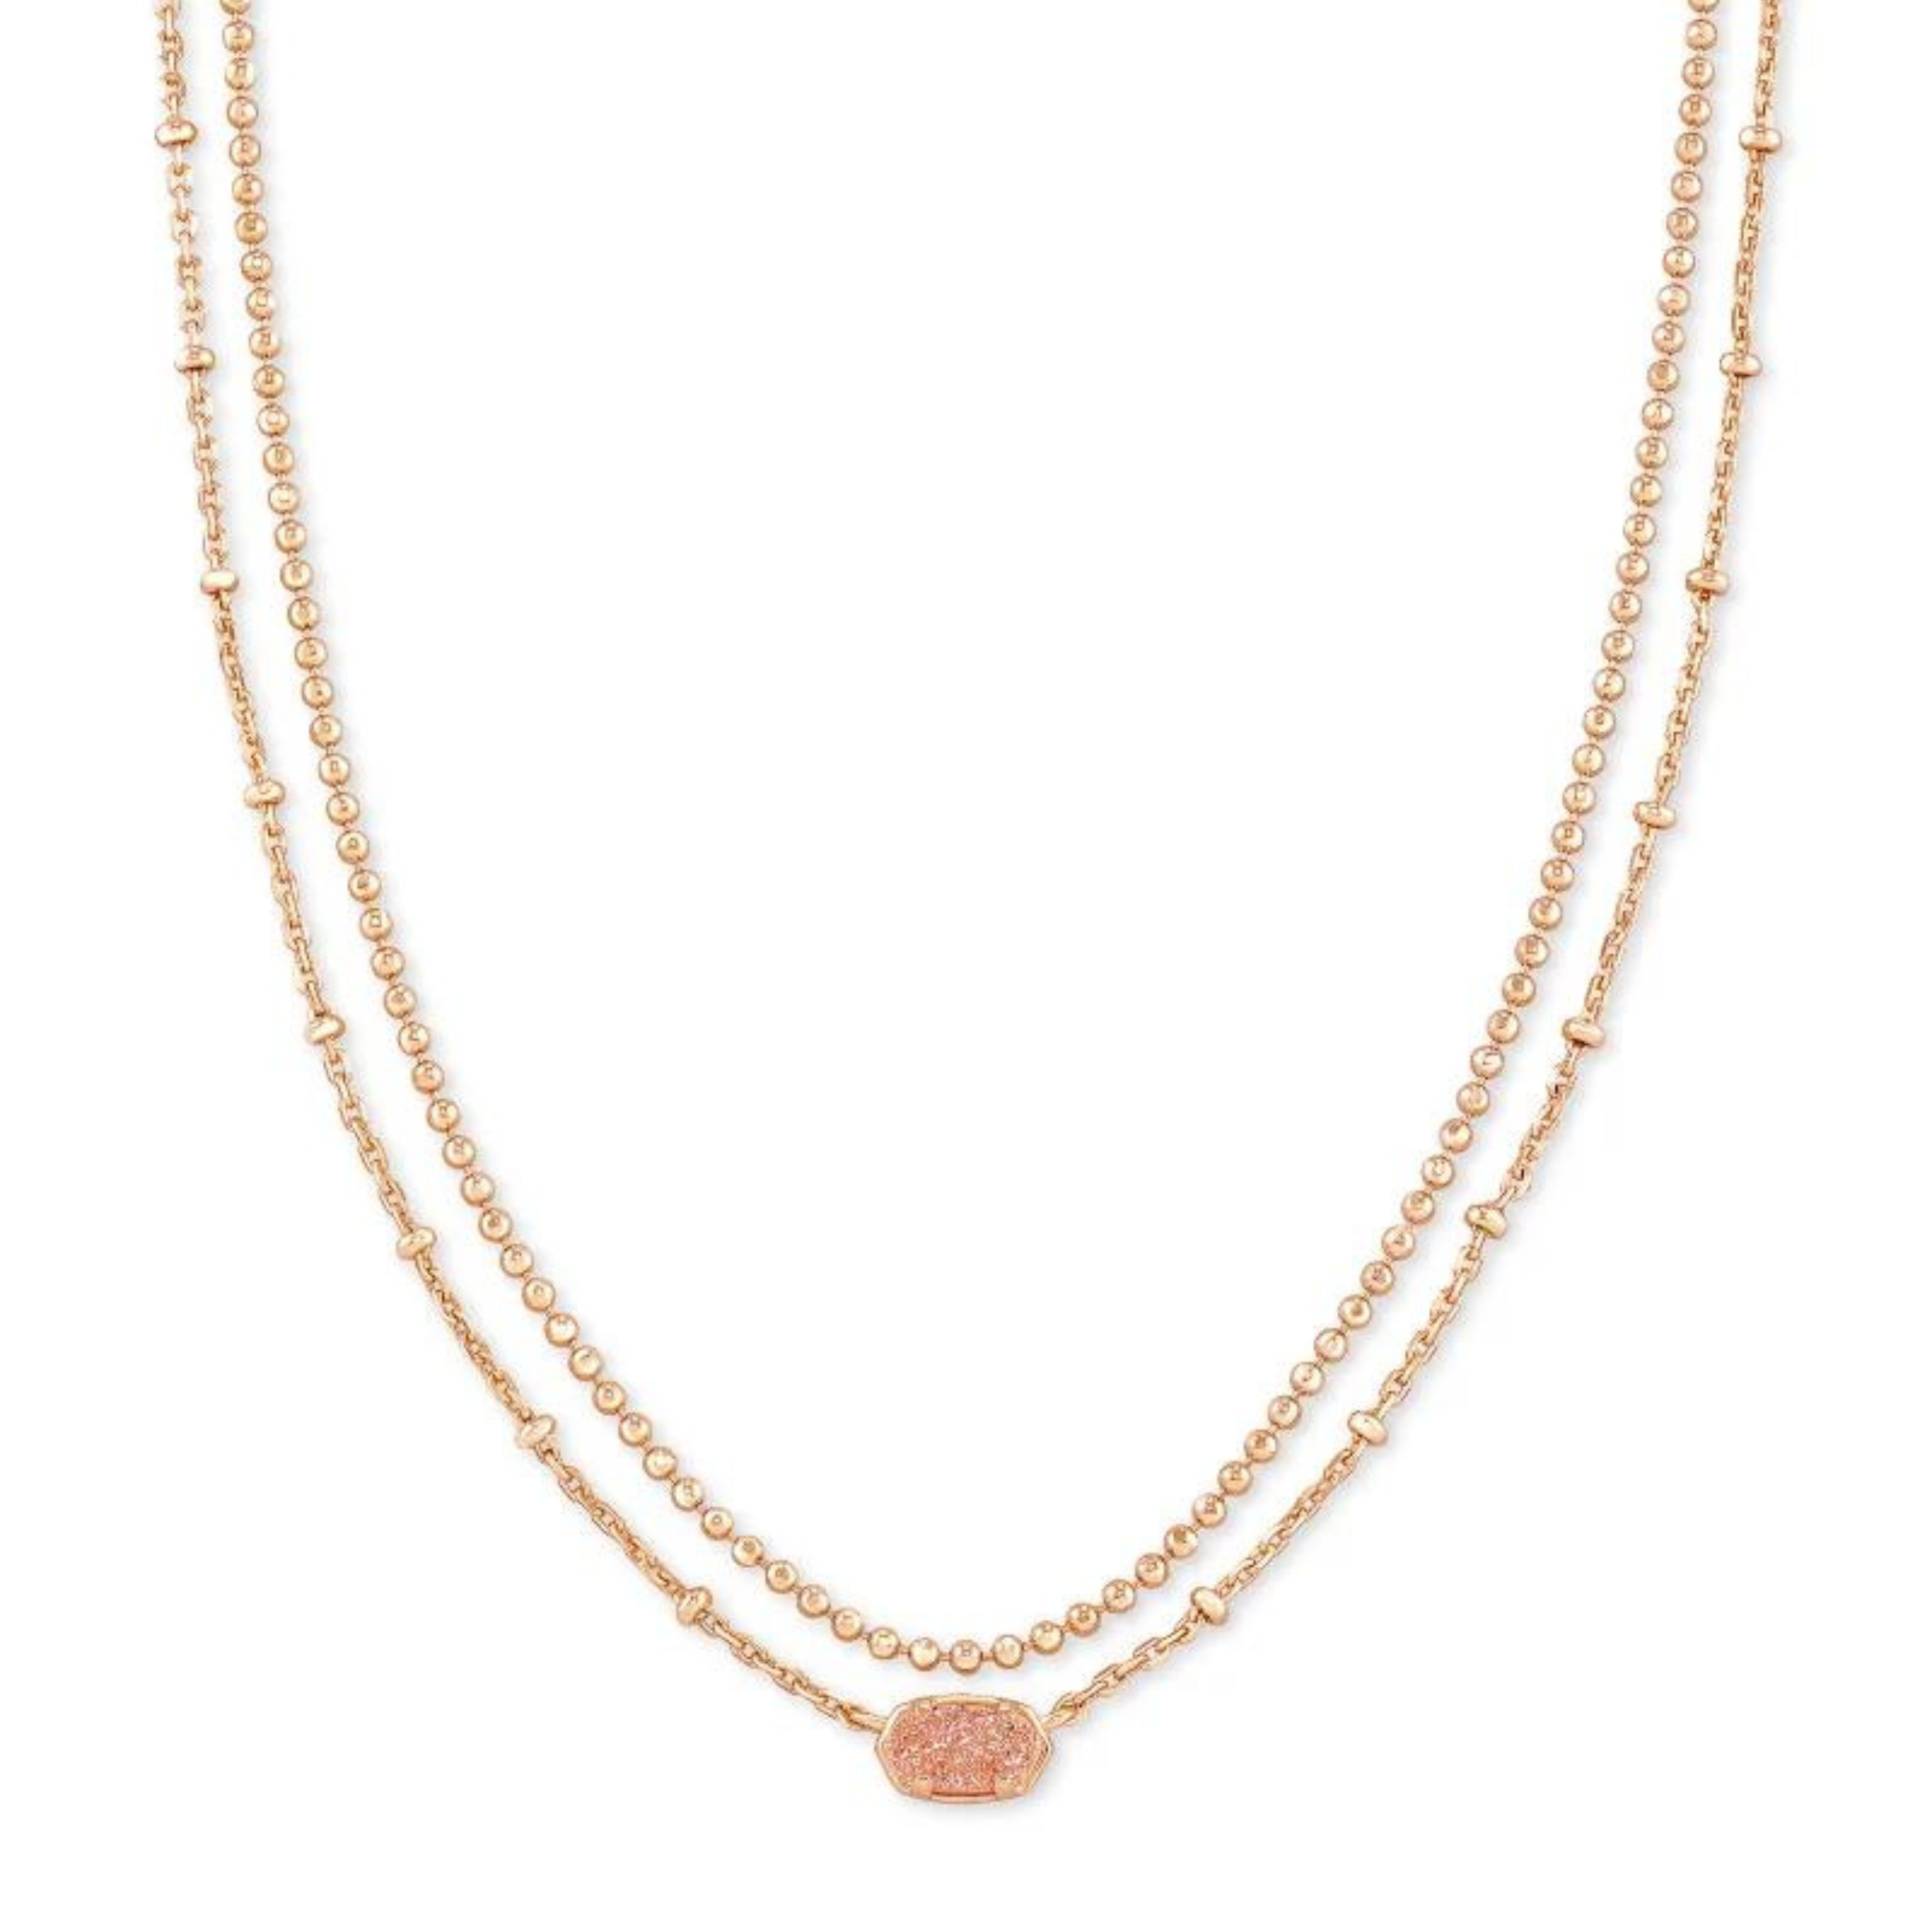 Rose gold multi stand necklace with a sand drusy pendant, pictured on a white background.